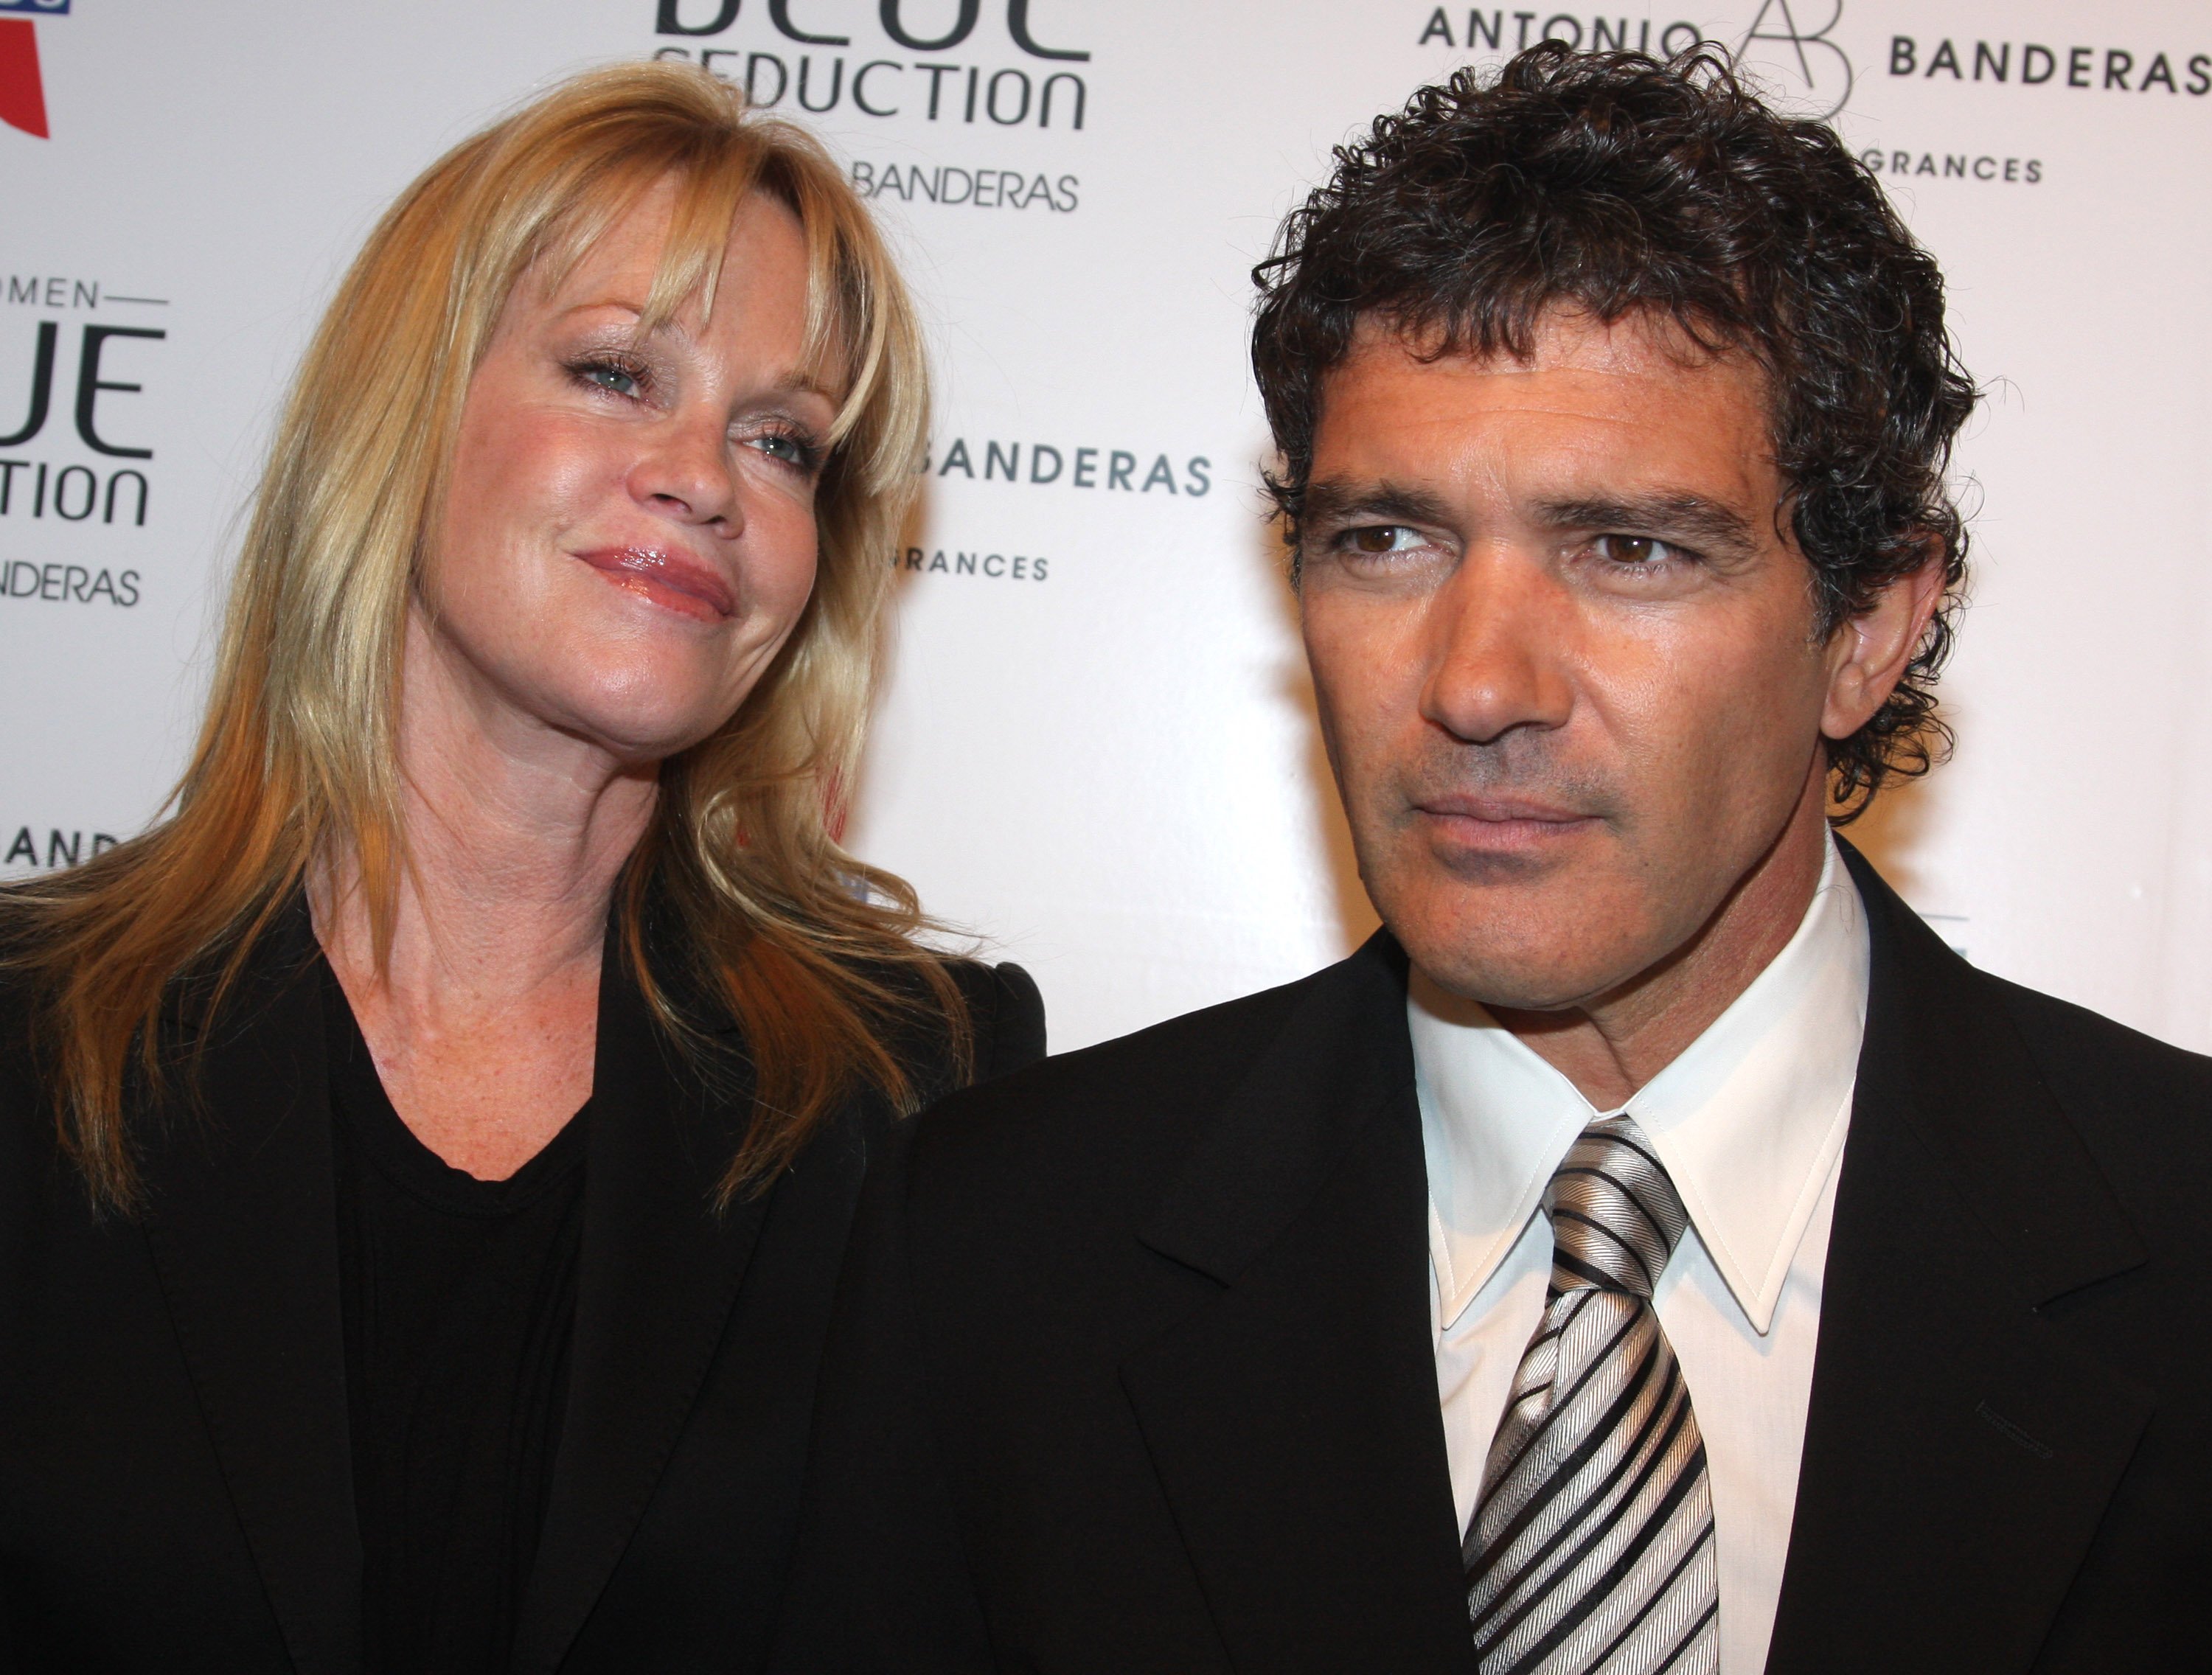 Actor Antonio Banderas and actress Melanie Griffith pose at The Antonio Banderas' Blue Seduction for Women fragrance launch at Cedar Lake on July 10, 2008 in New York City ┃Source: Getty Images